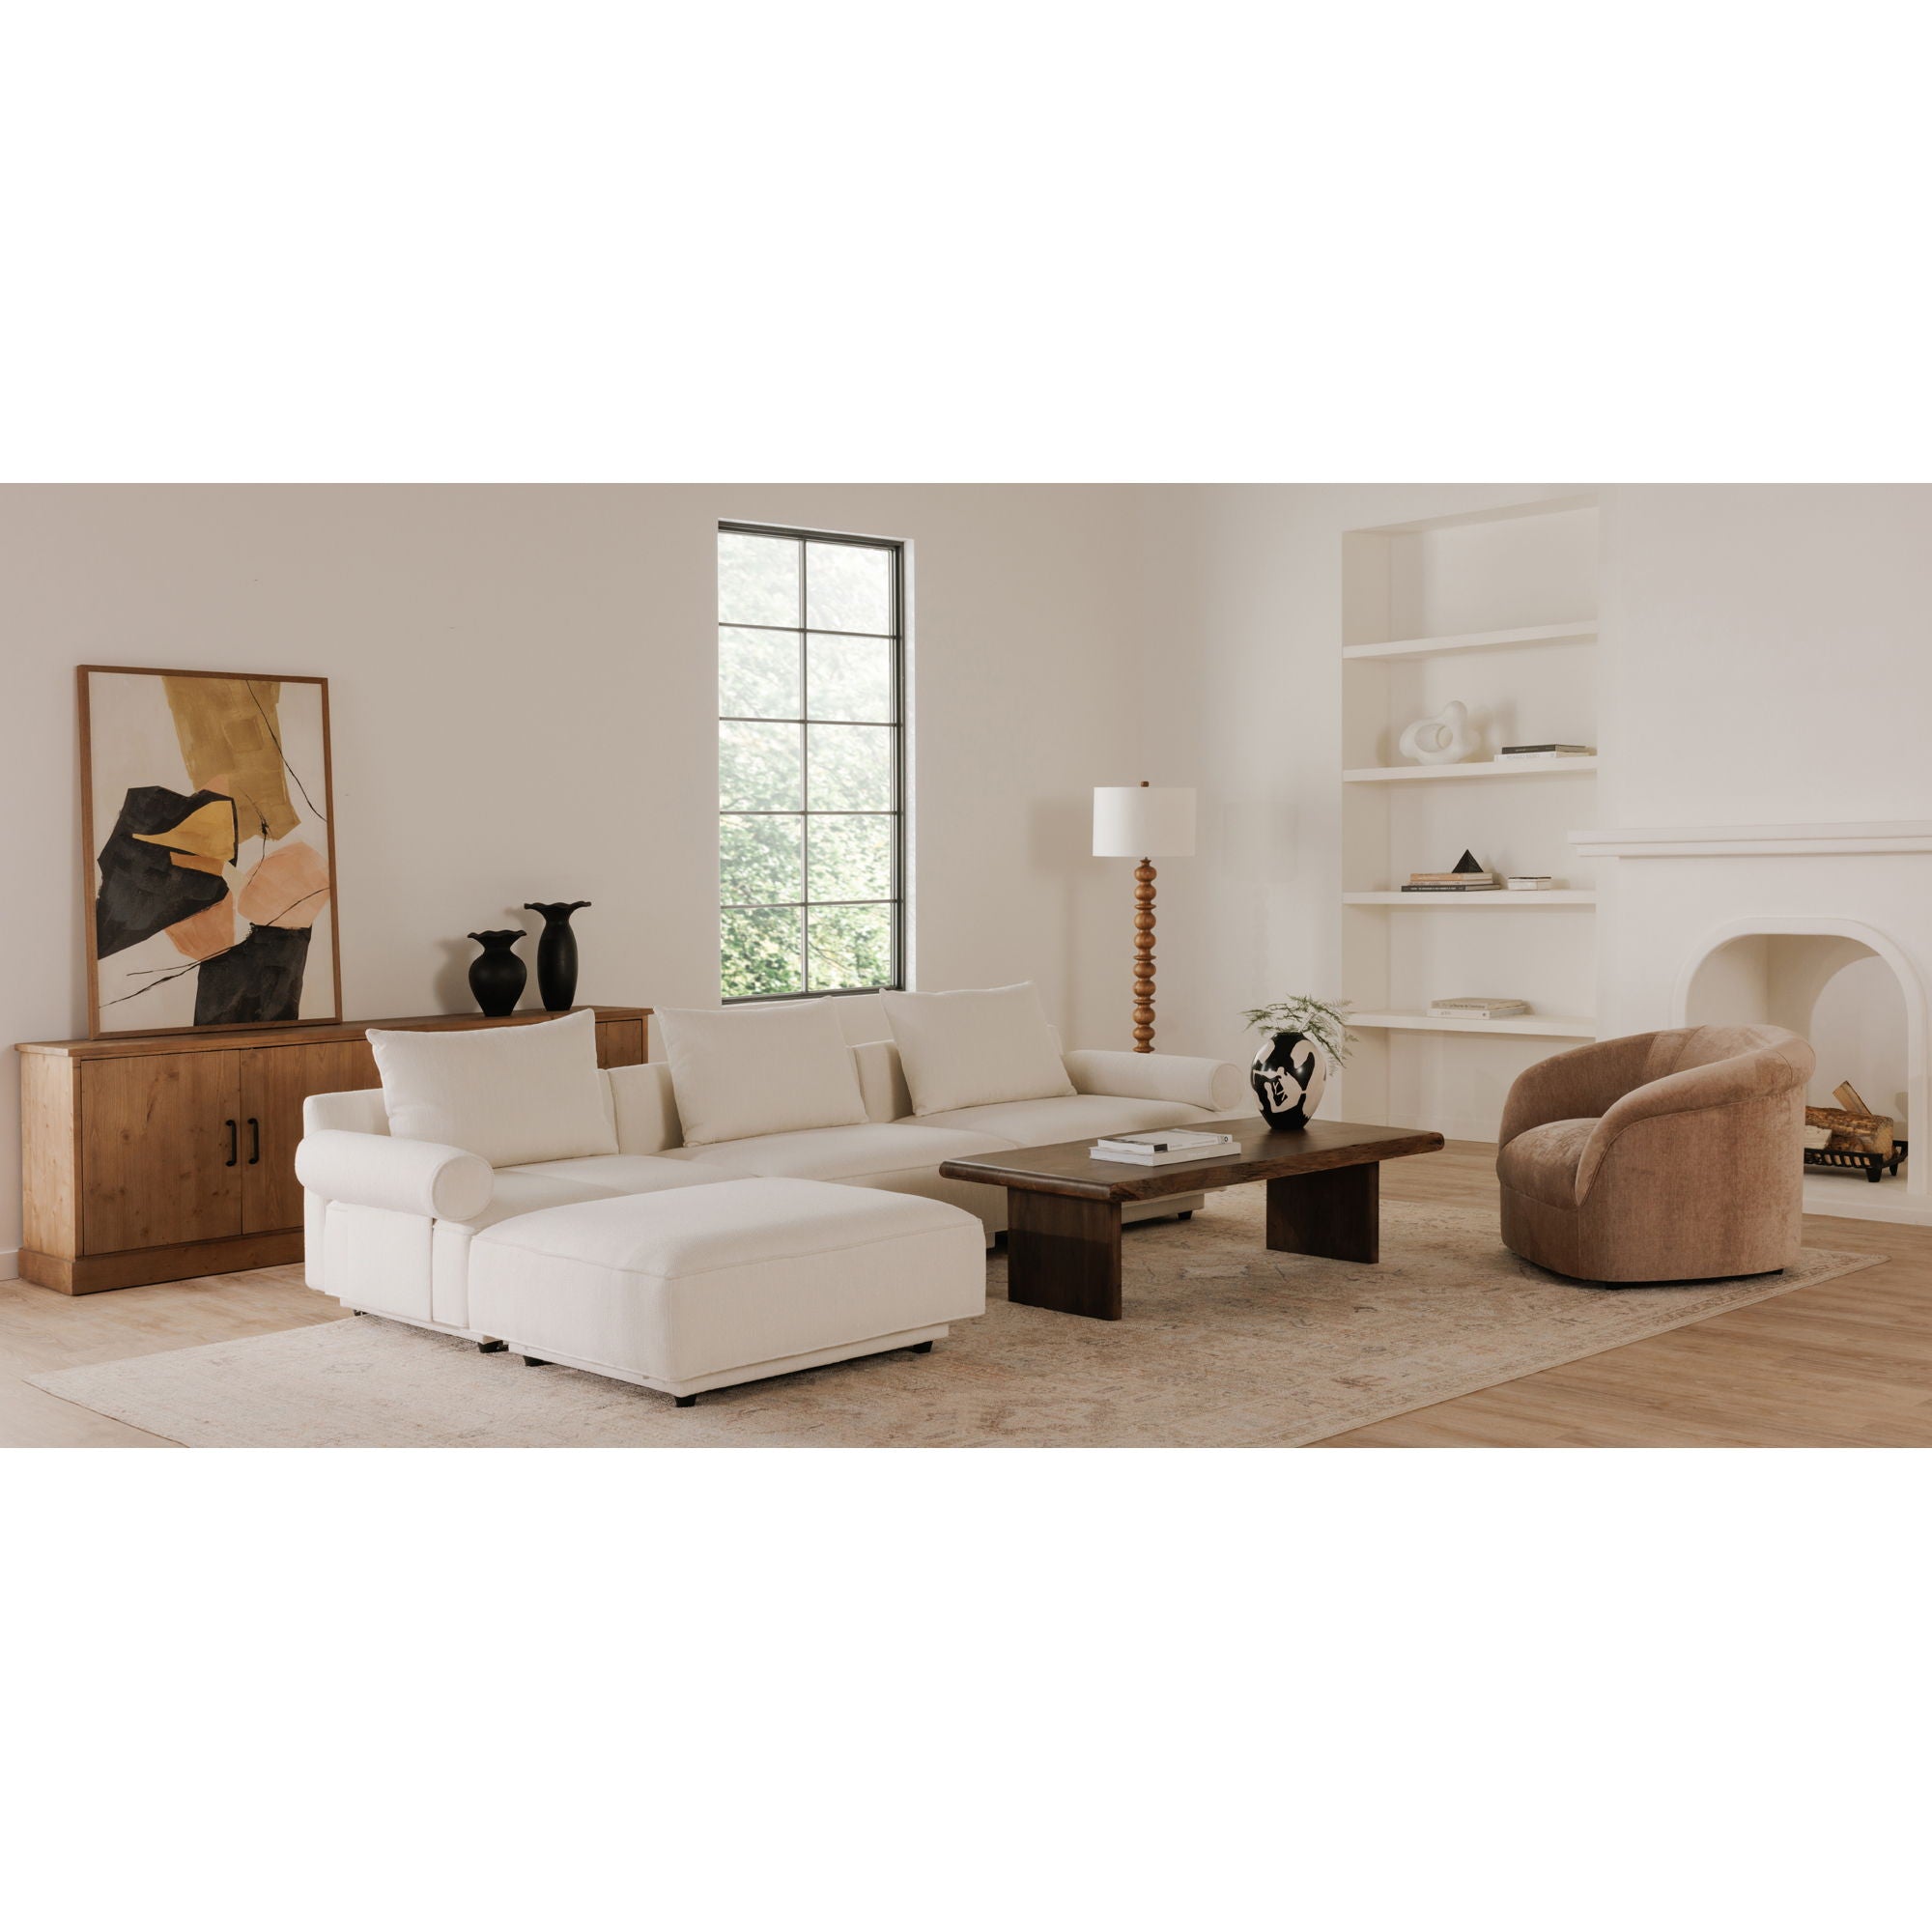 Rosello - Lounge Modular Sectional - White-Stationary Sectionals-American Furniture Outlet